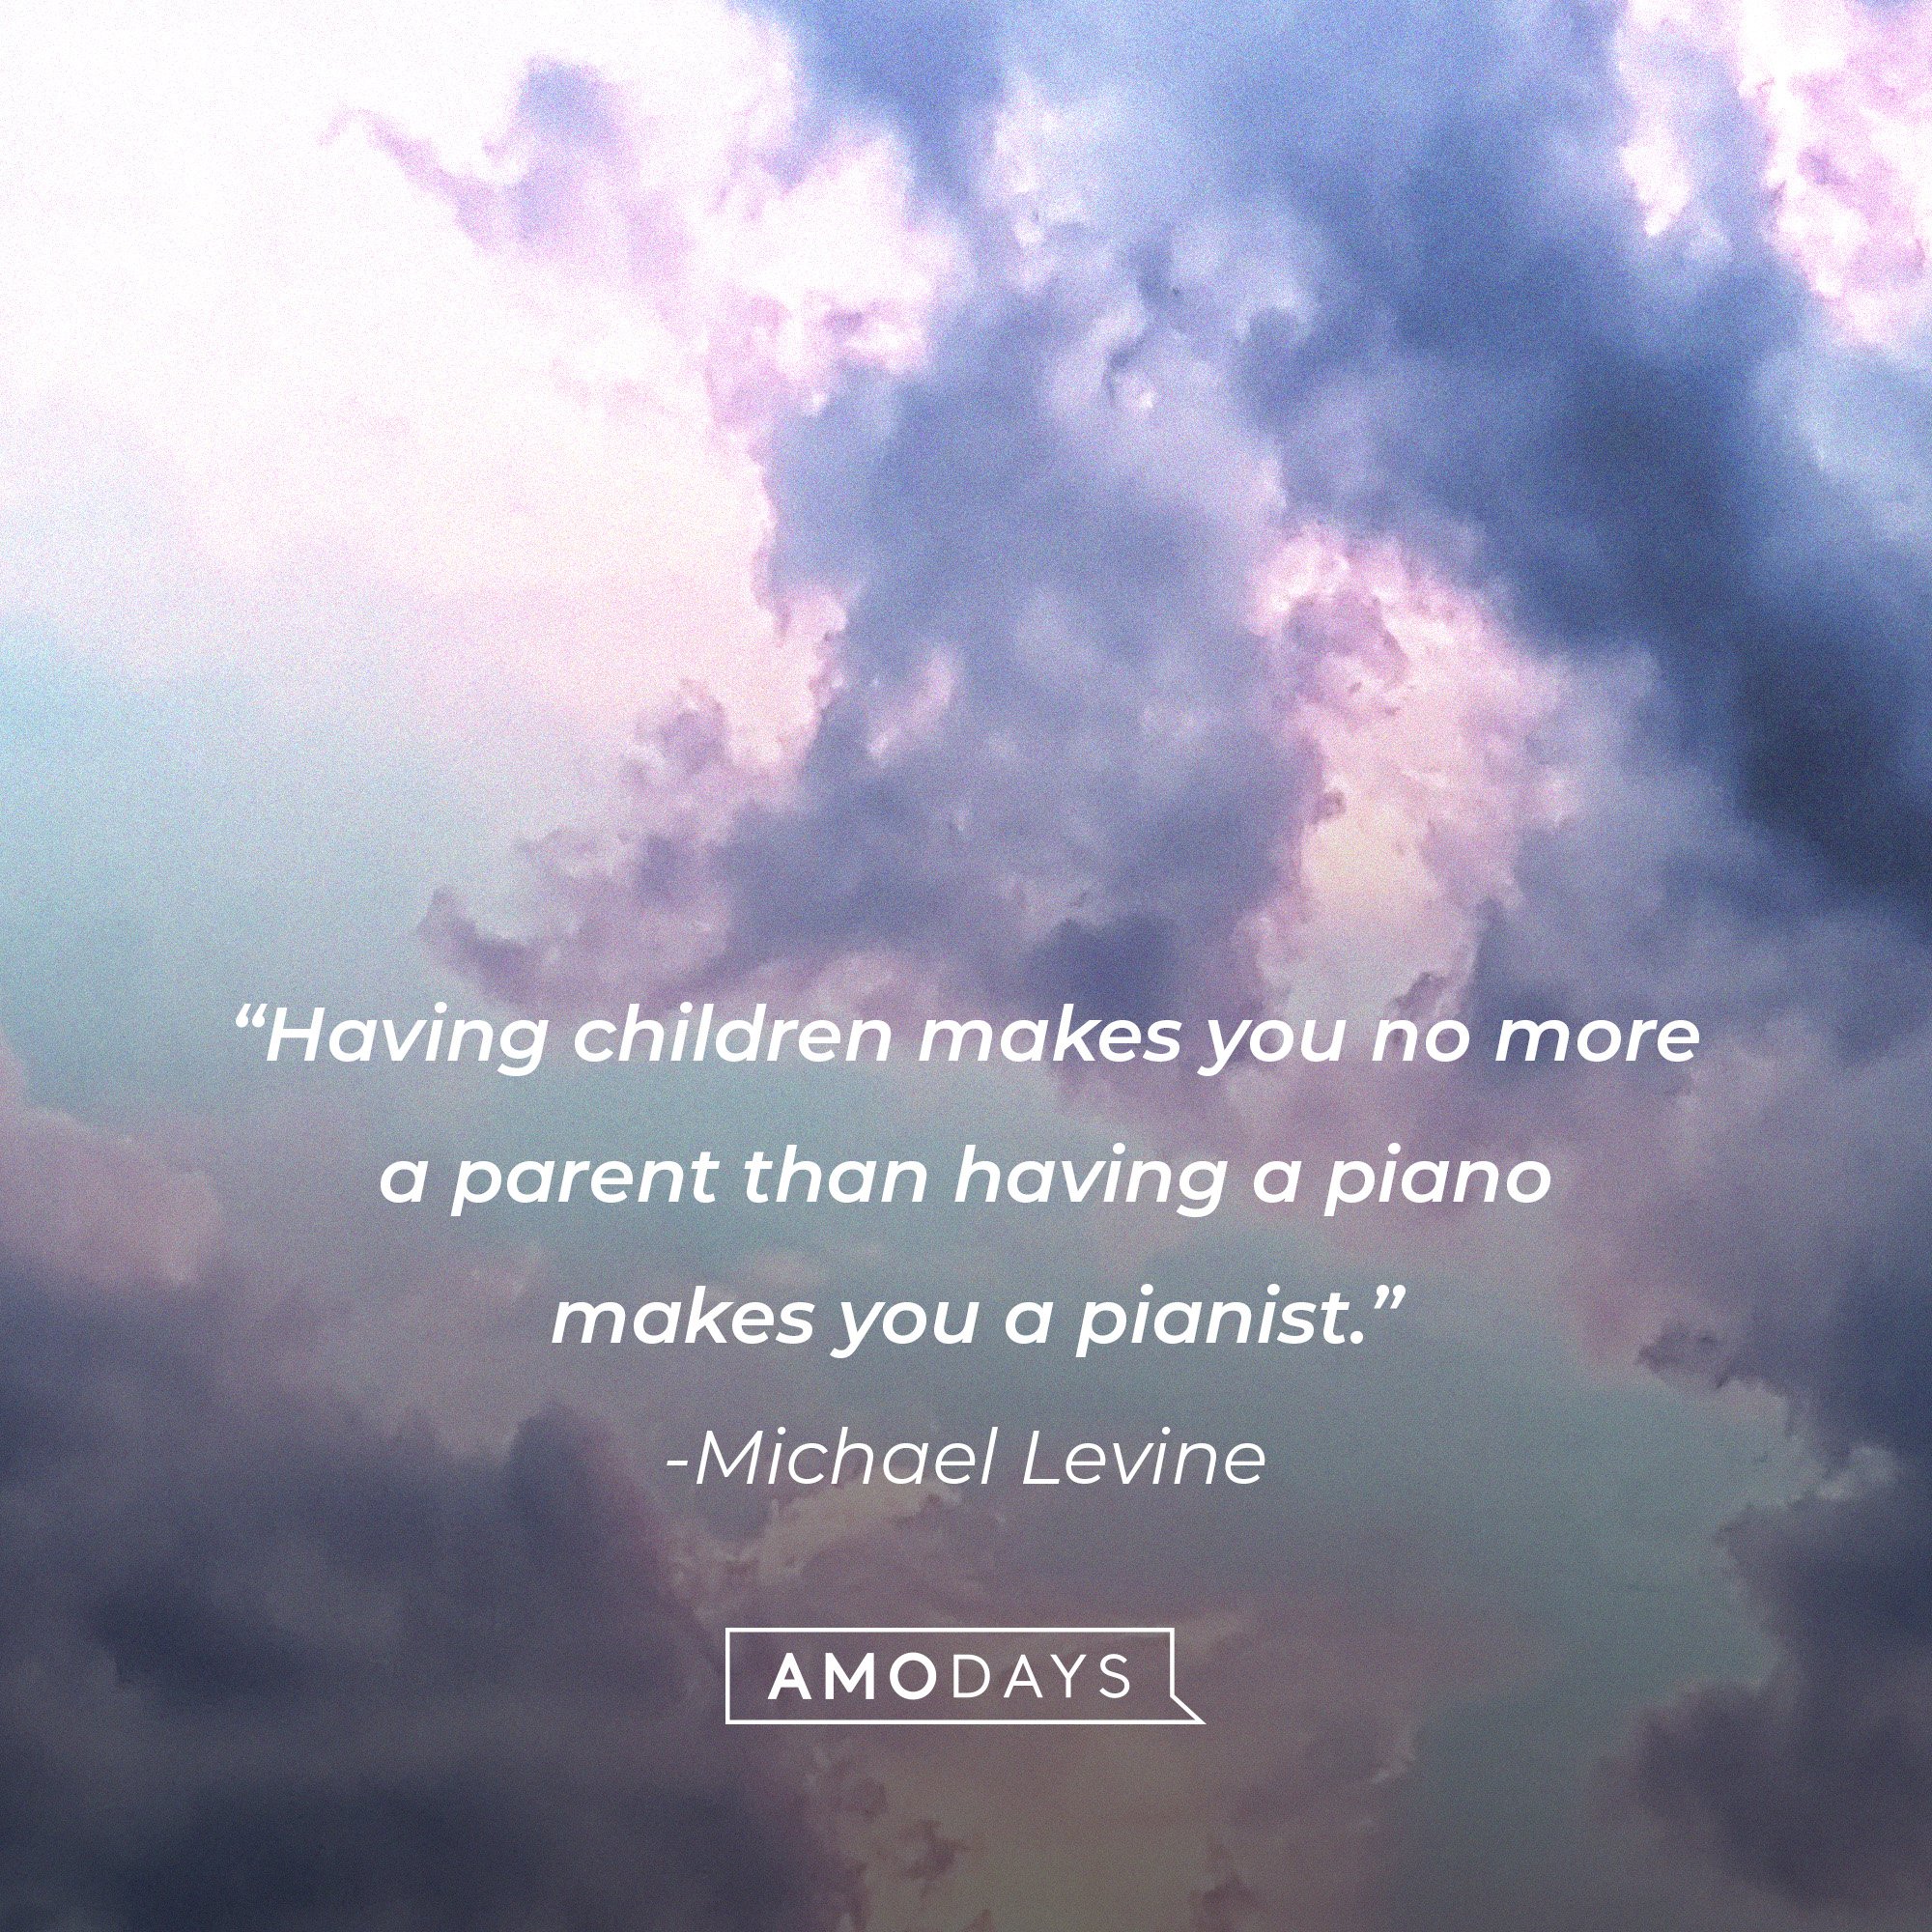 Michael Levine's quote: “Having children makes you no more a parent than having a piano makes you a pianist.” I Image: AmoDays